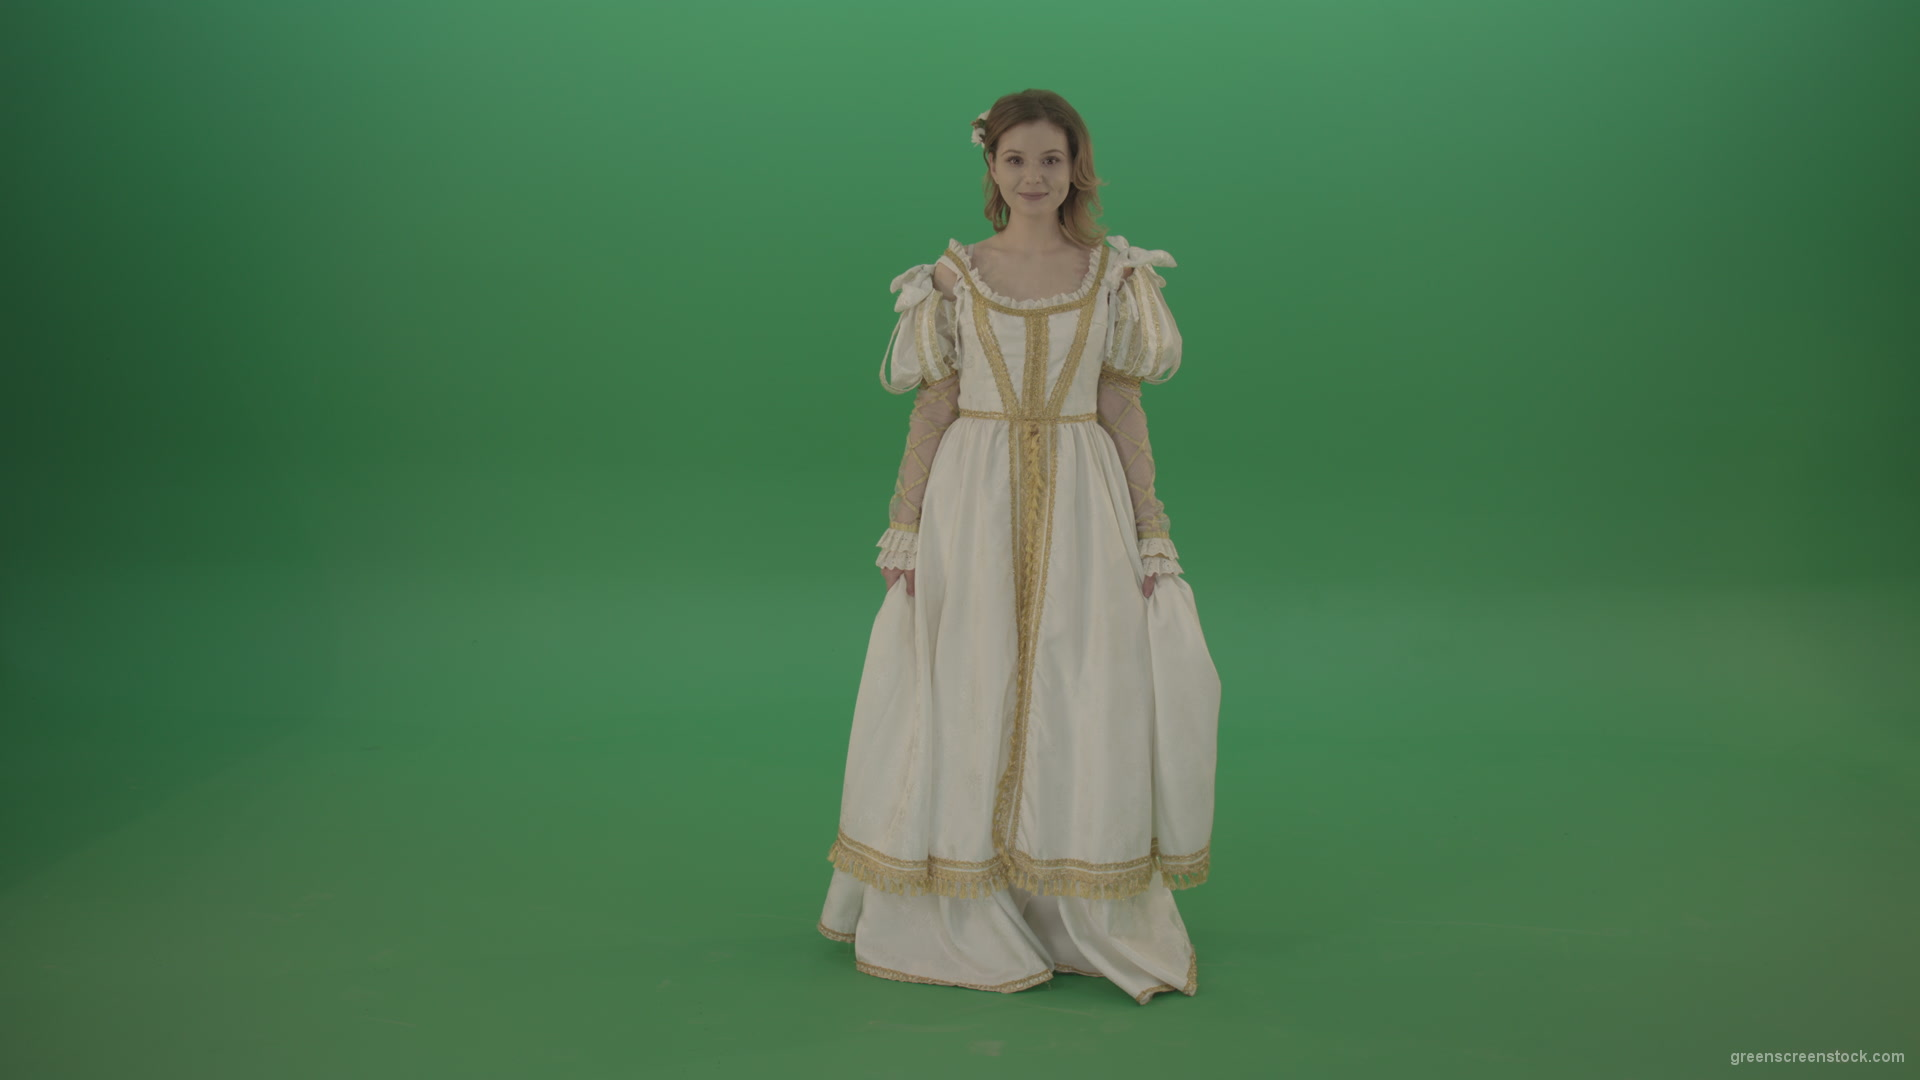 Girl-worships-from-side-to-side-dressed-in-white-dress-isolated-on-green-background_001 Green Screen Stock